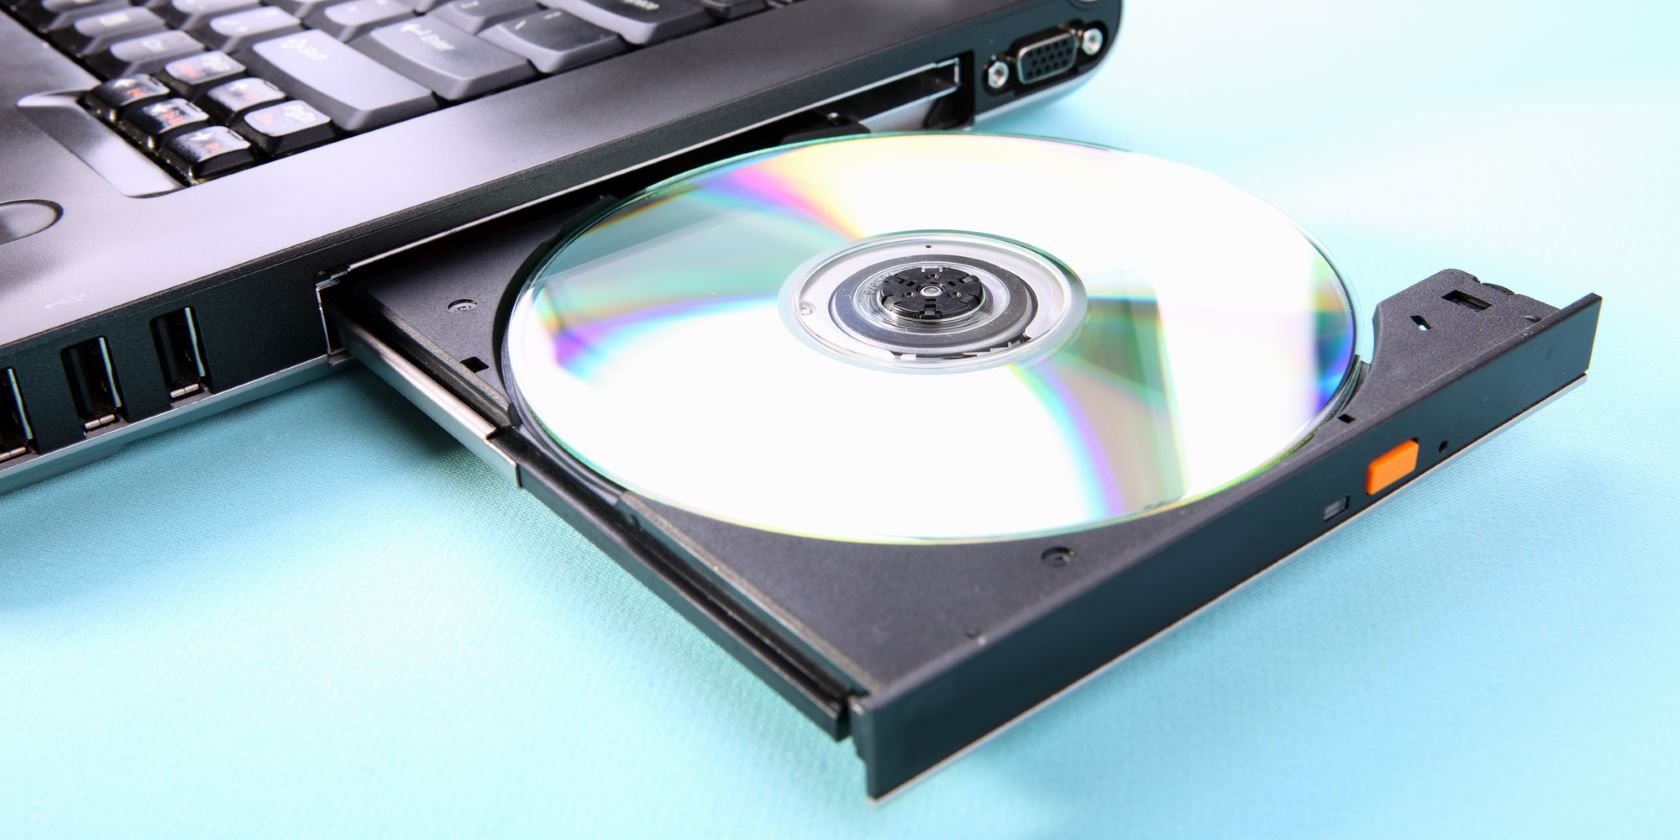 optical drive - Does a scratched DVD result in lost data, and how do I fix  a scratched DVD? - Super User